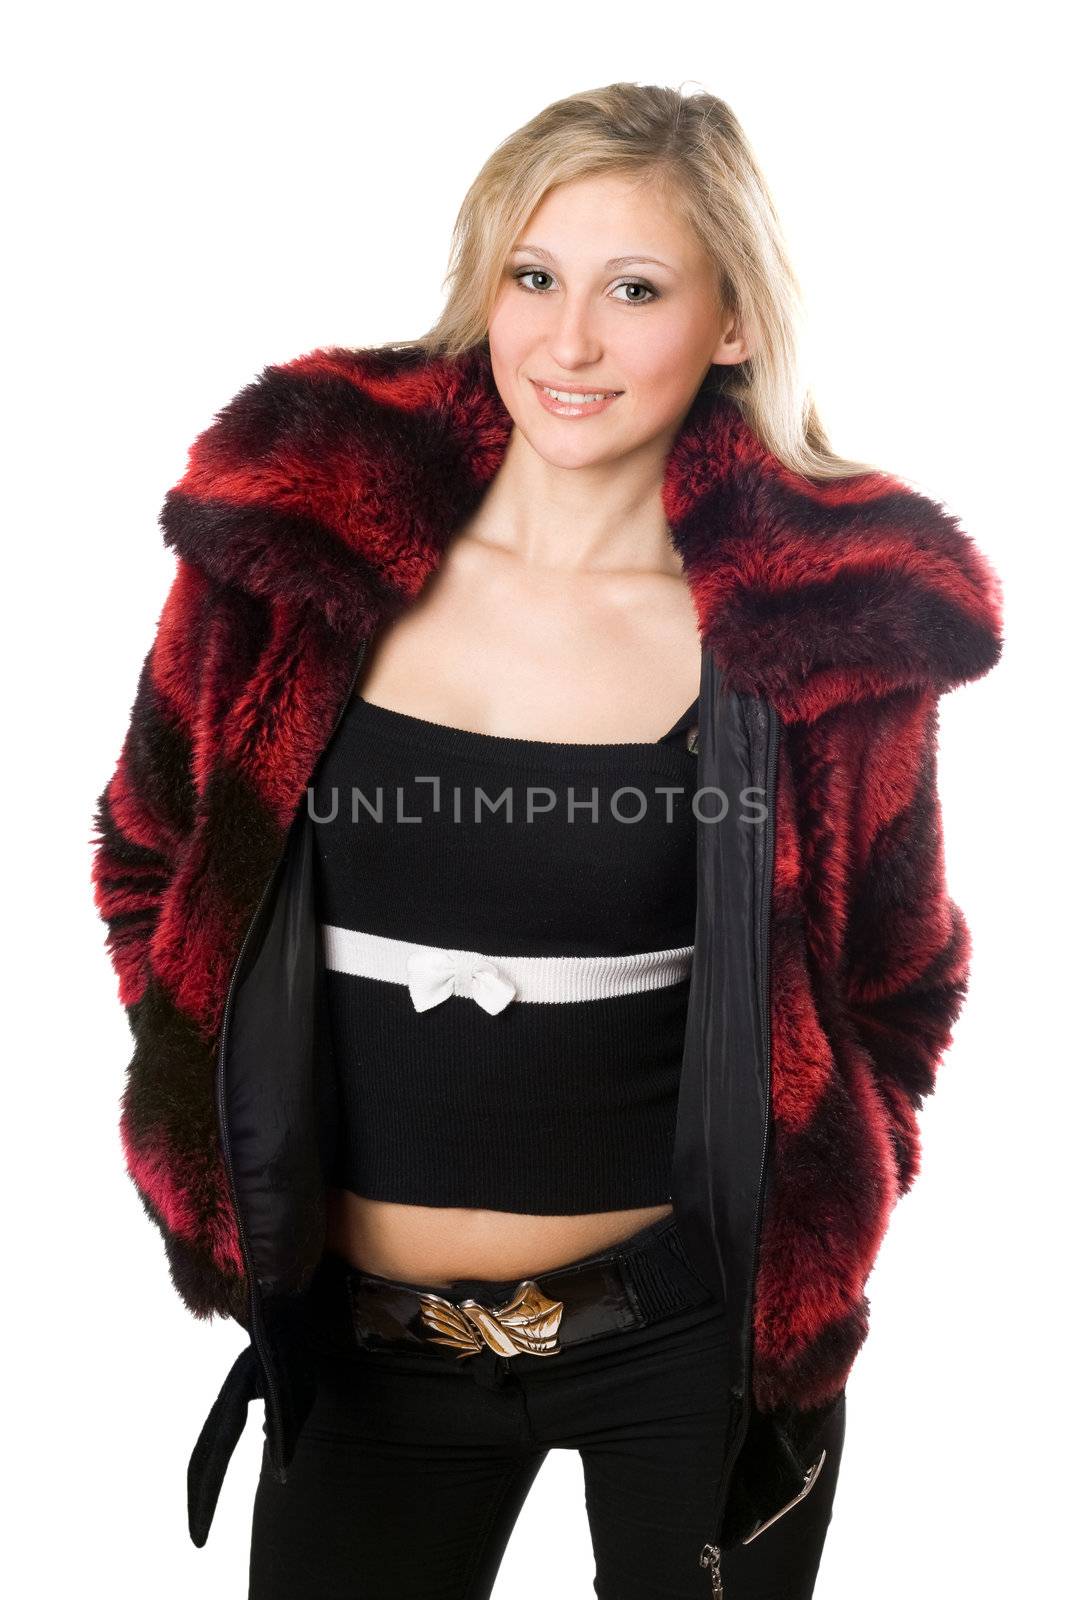 Smiling young blond woman in a fur jacket. Isolated on white